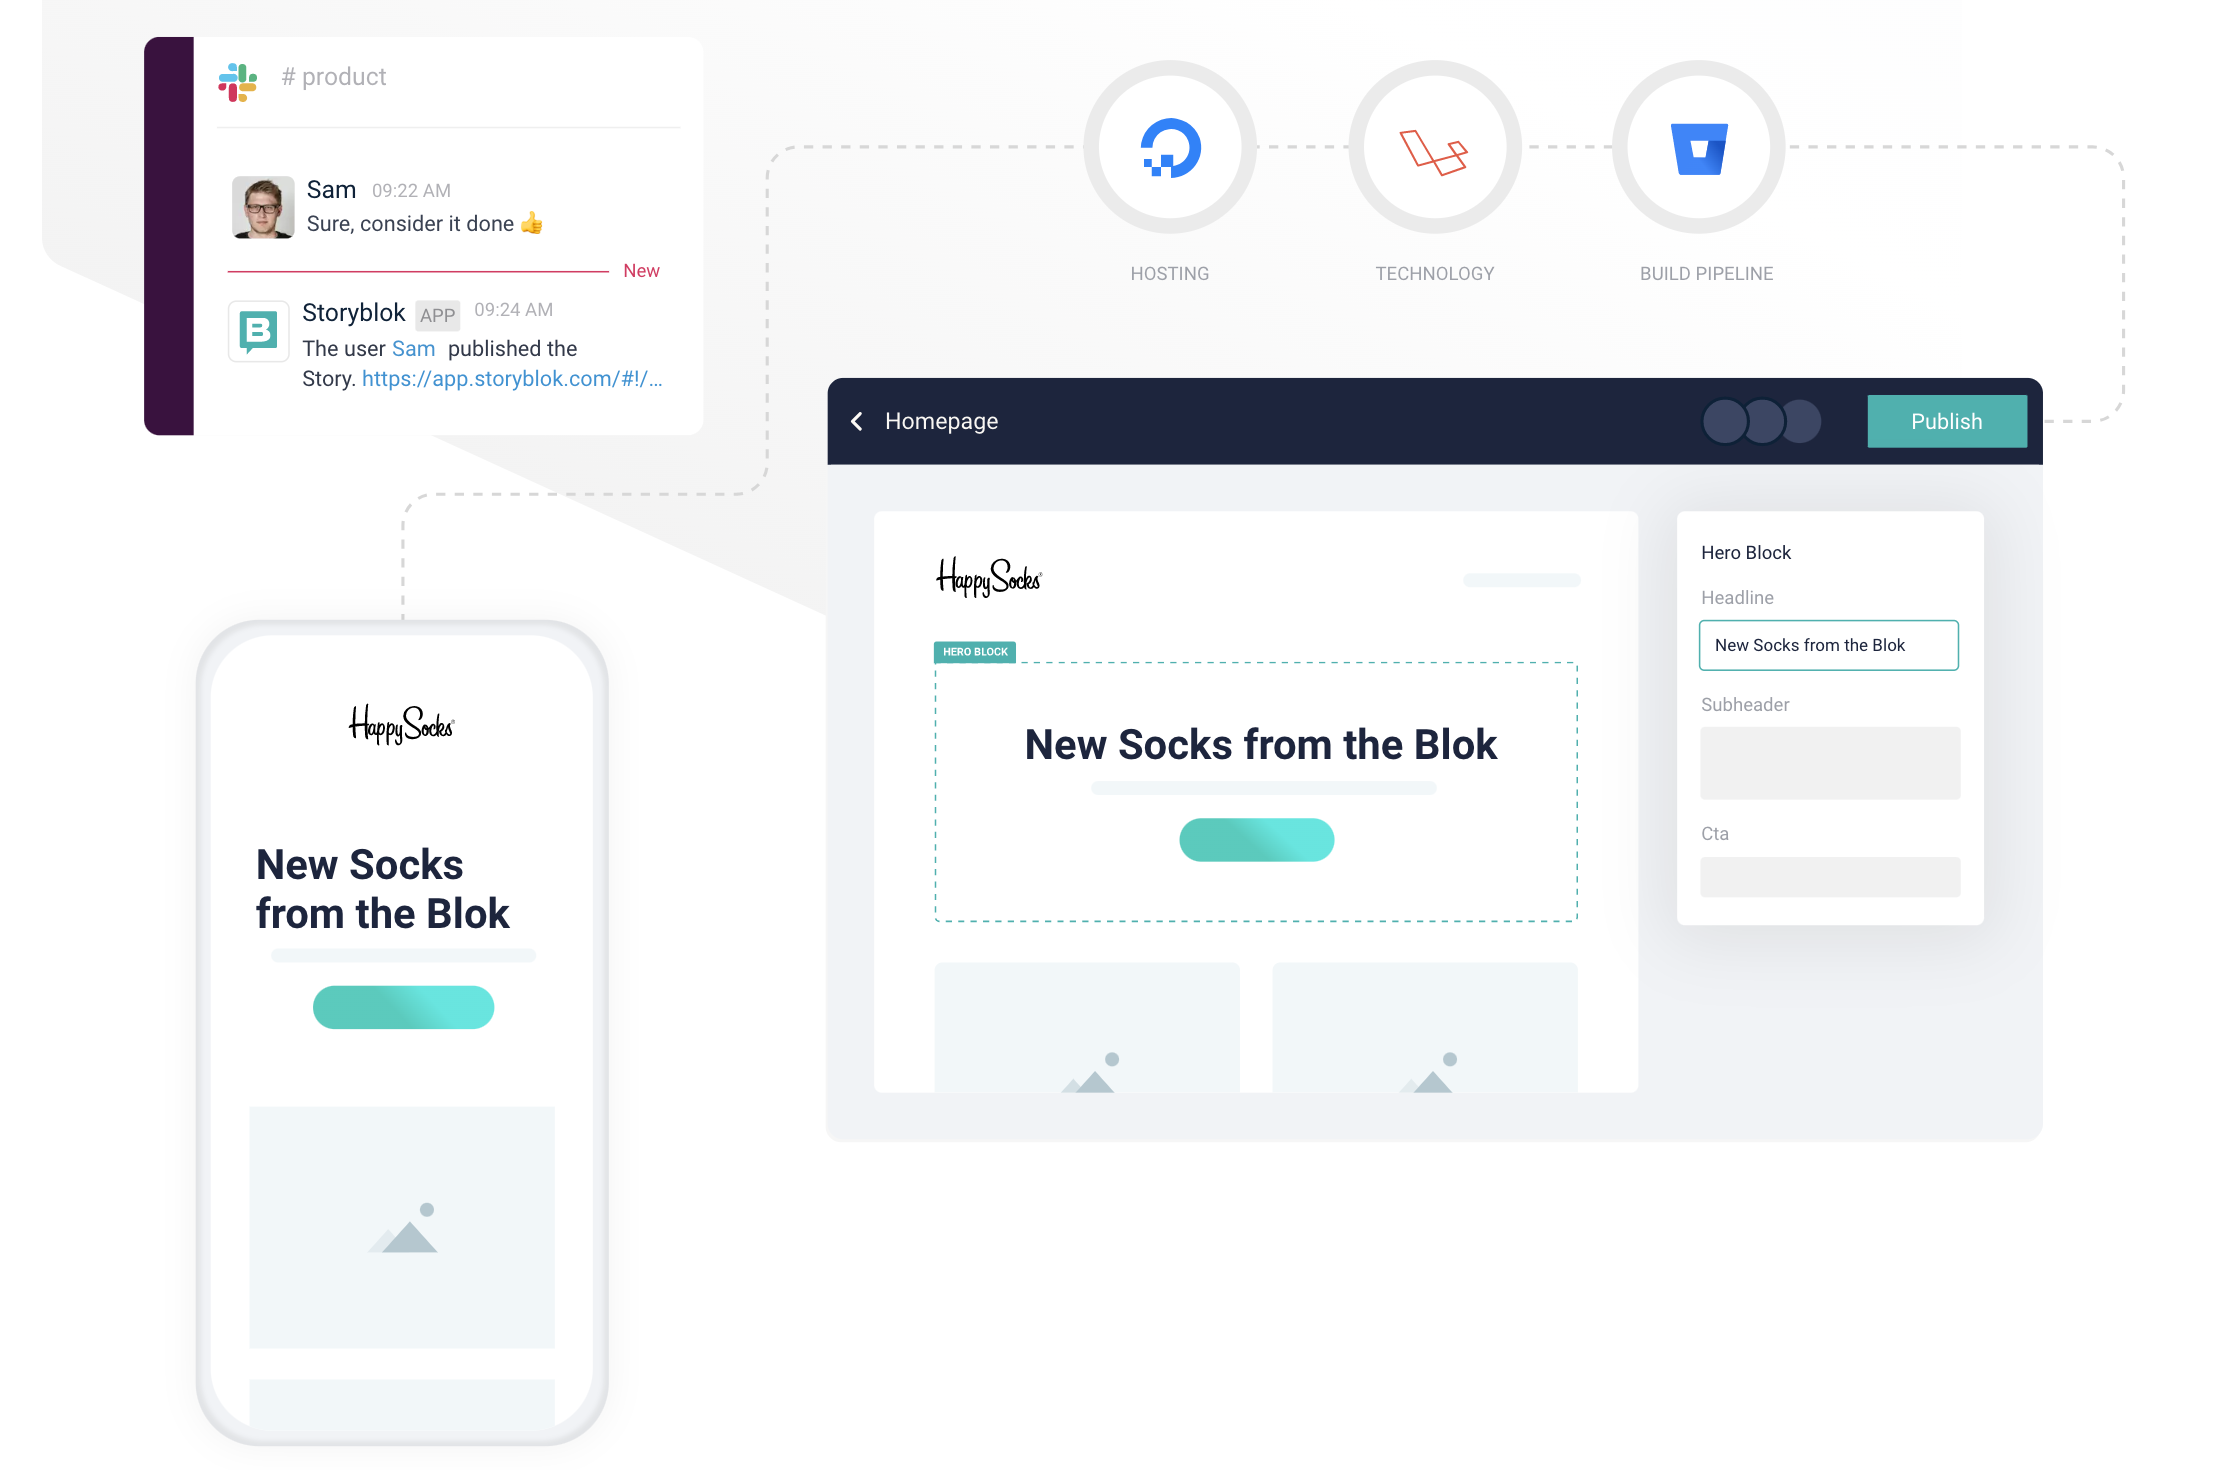 Storyblok raises $47M to build out its headless CMS aimed at non-technical users like marketers